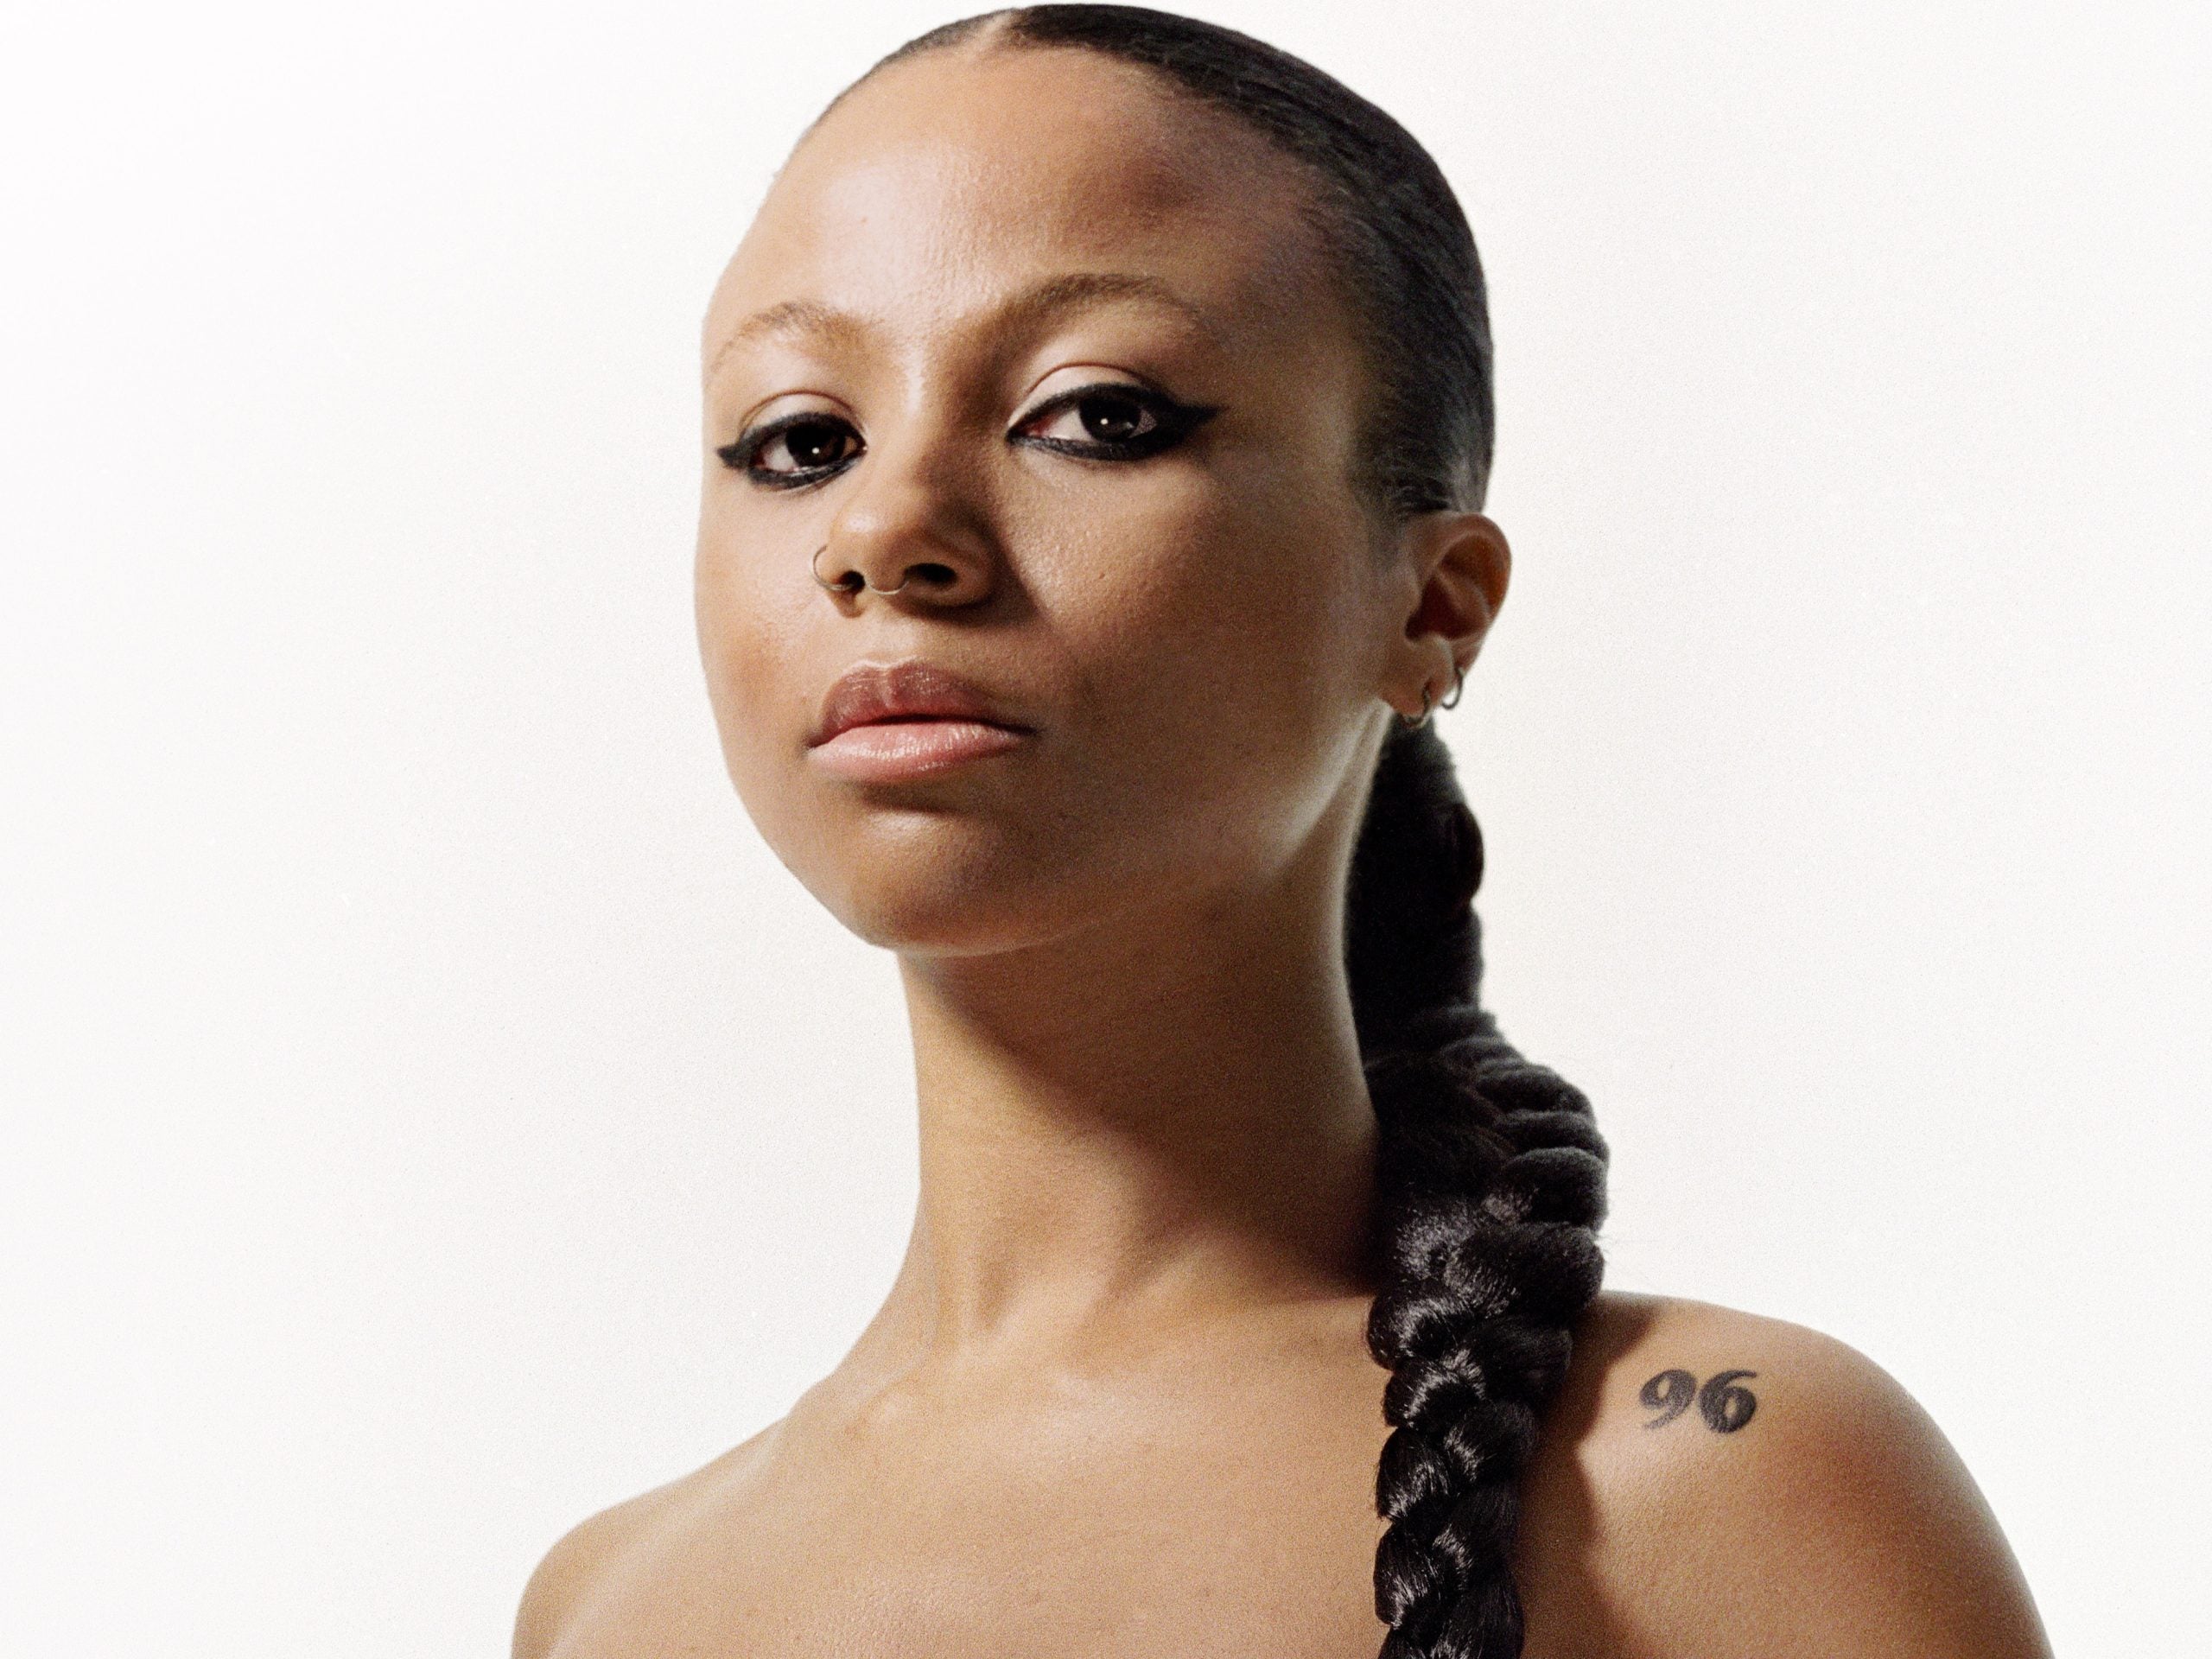 Myh'ala Herrold On Her Love Of Eartha Kitt, Fashion Icons, & Newest Gig As The Face Of COS